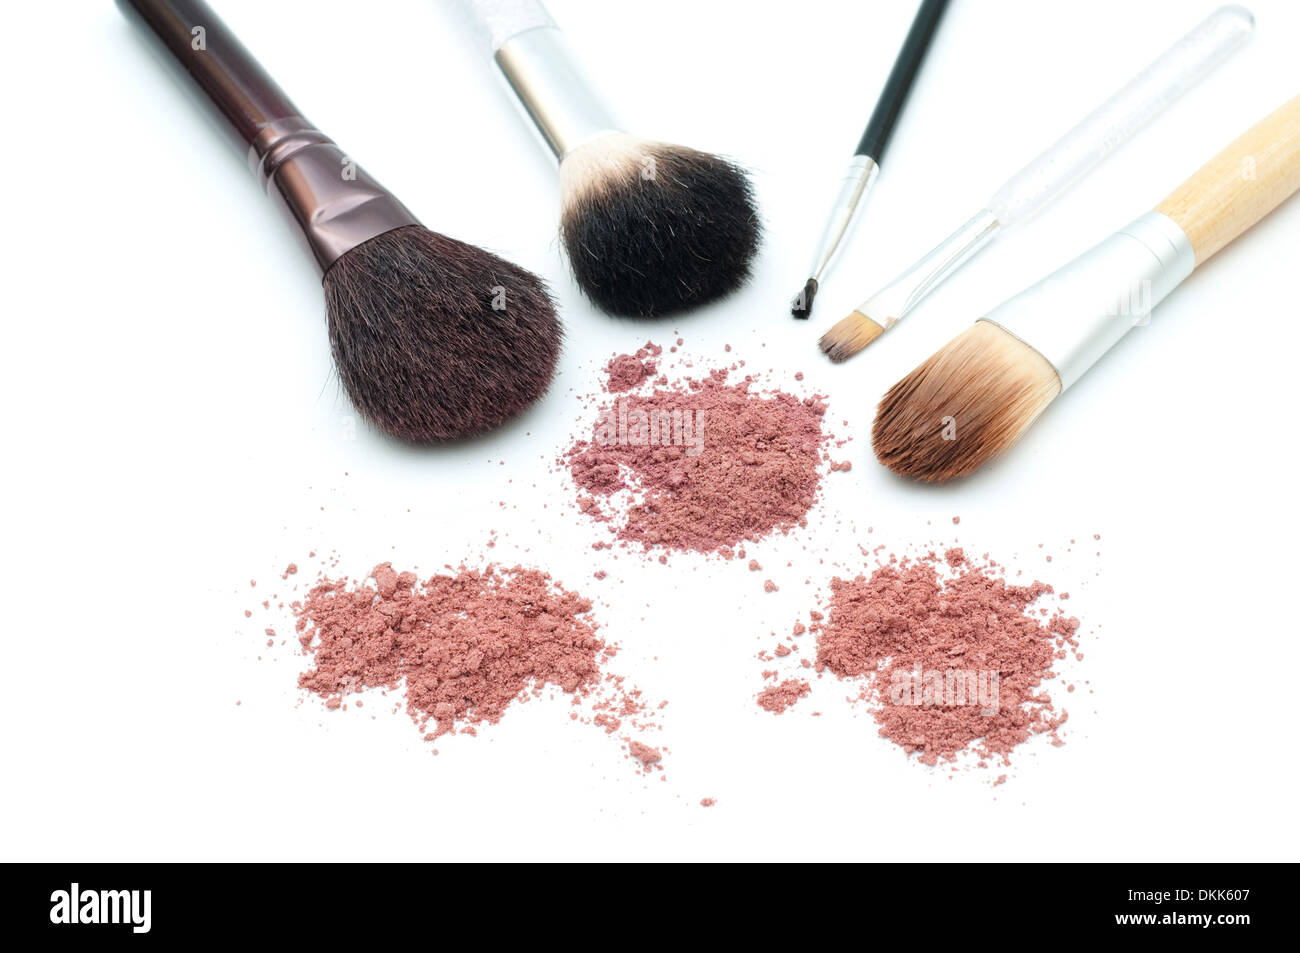 Makeup brushes and powder isolated on white Stock Photo